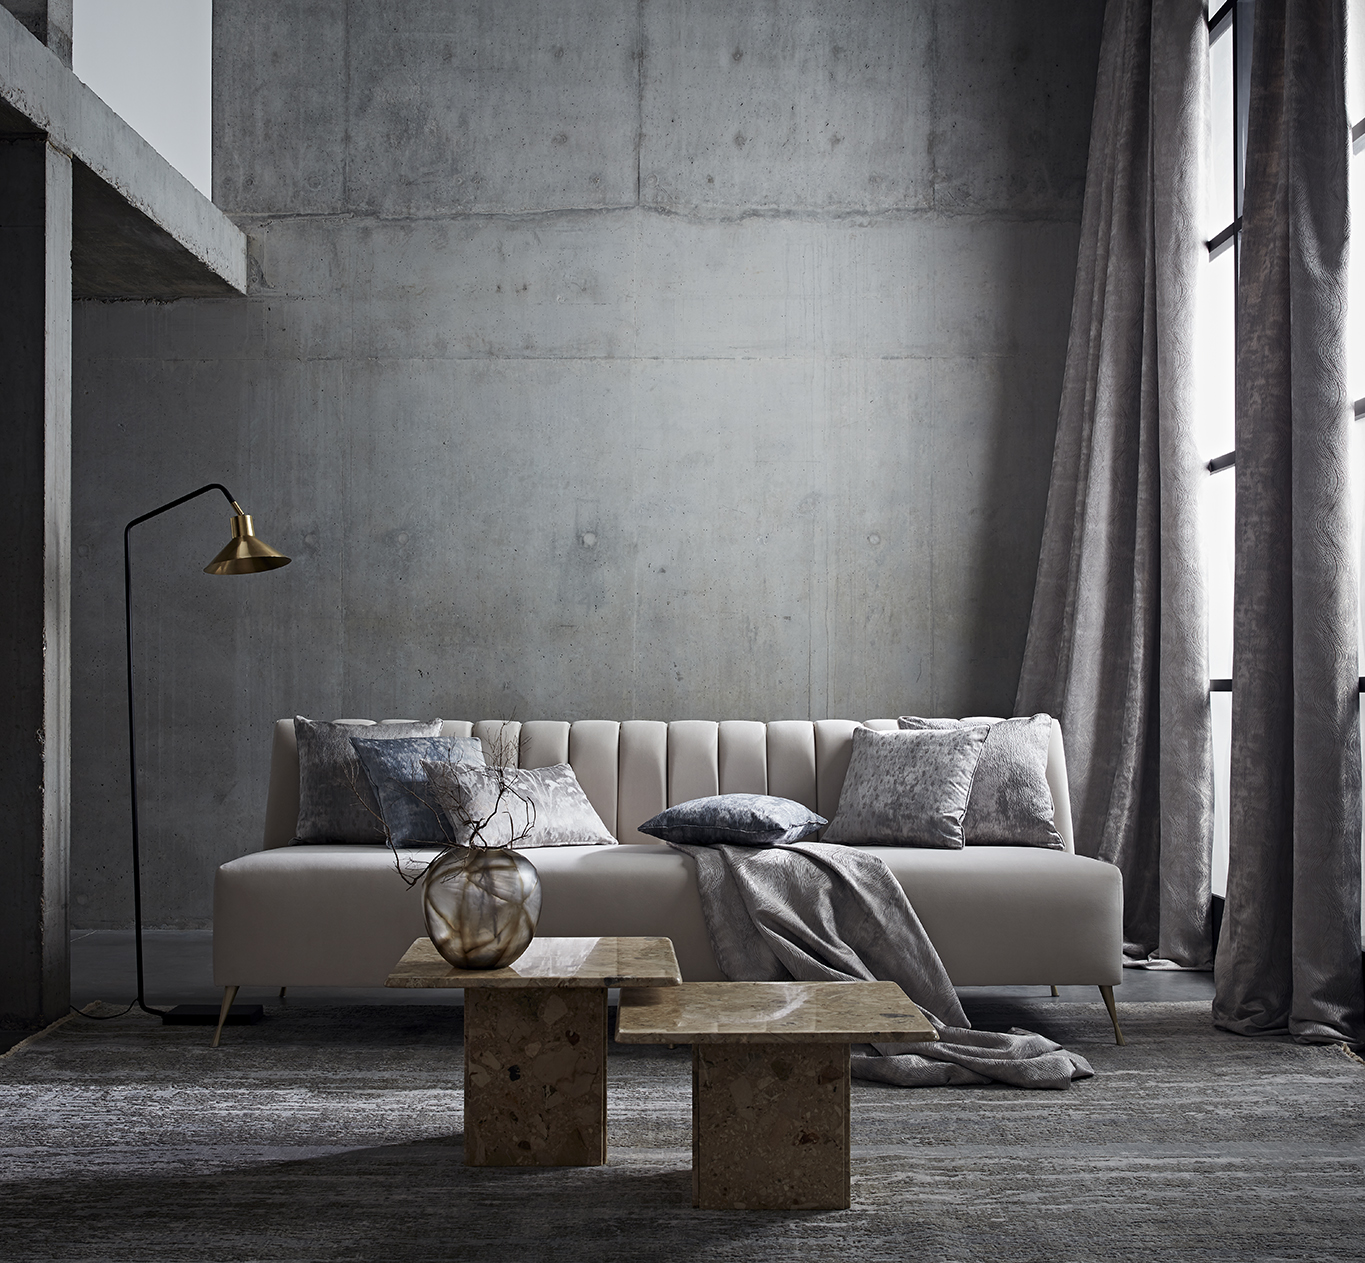 Clarke & Clarke Launches a Woven Jacquard Fabrics Collection – Diffusion